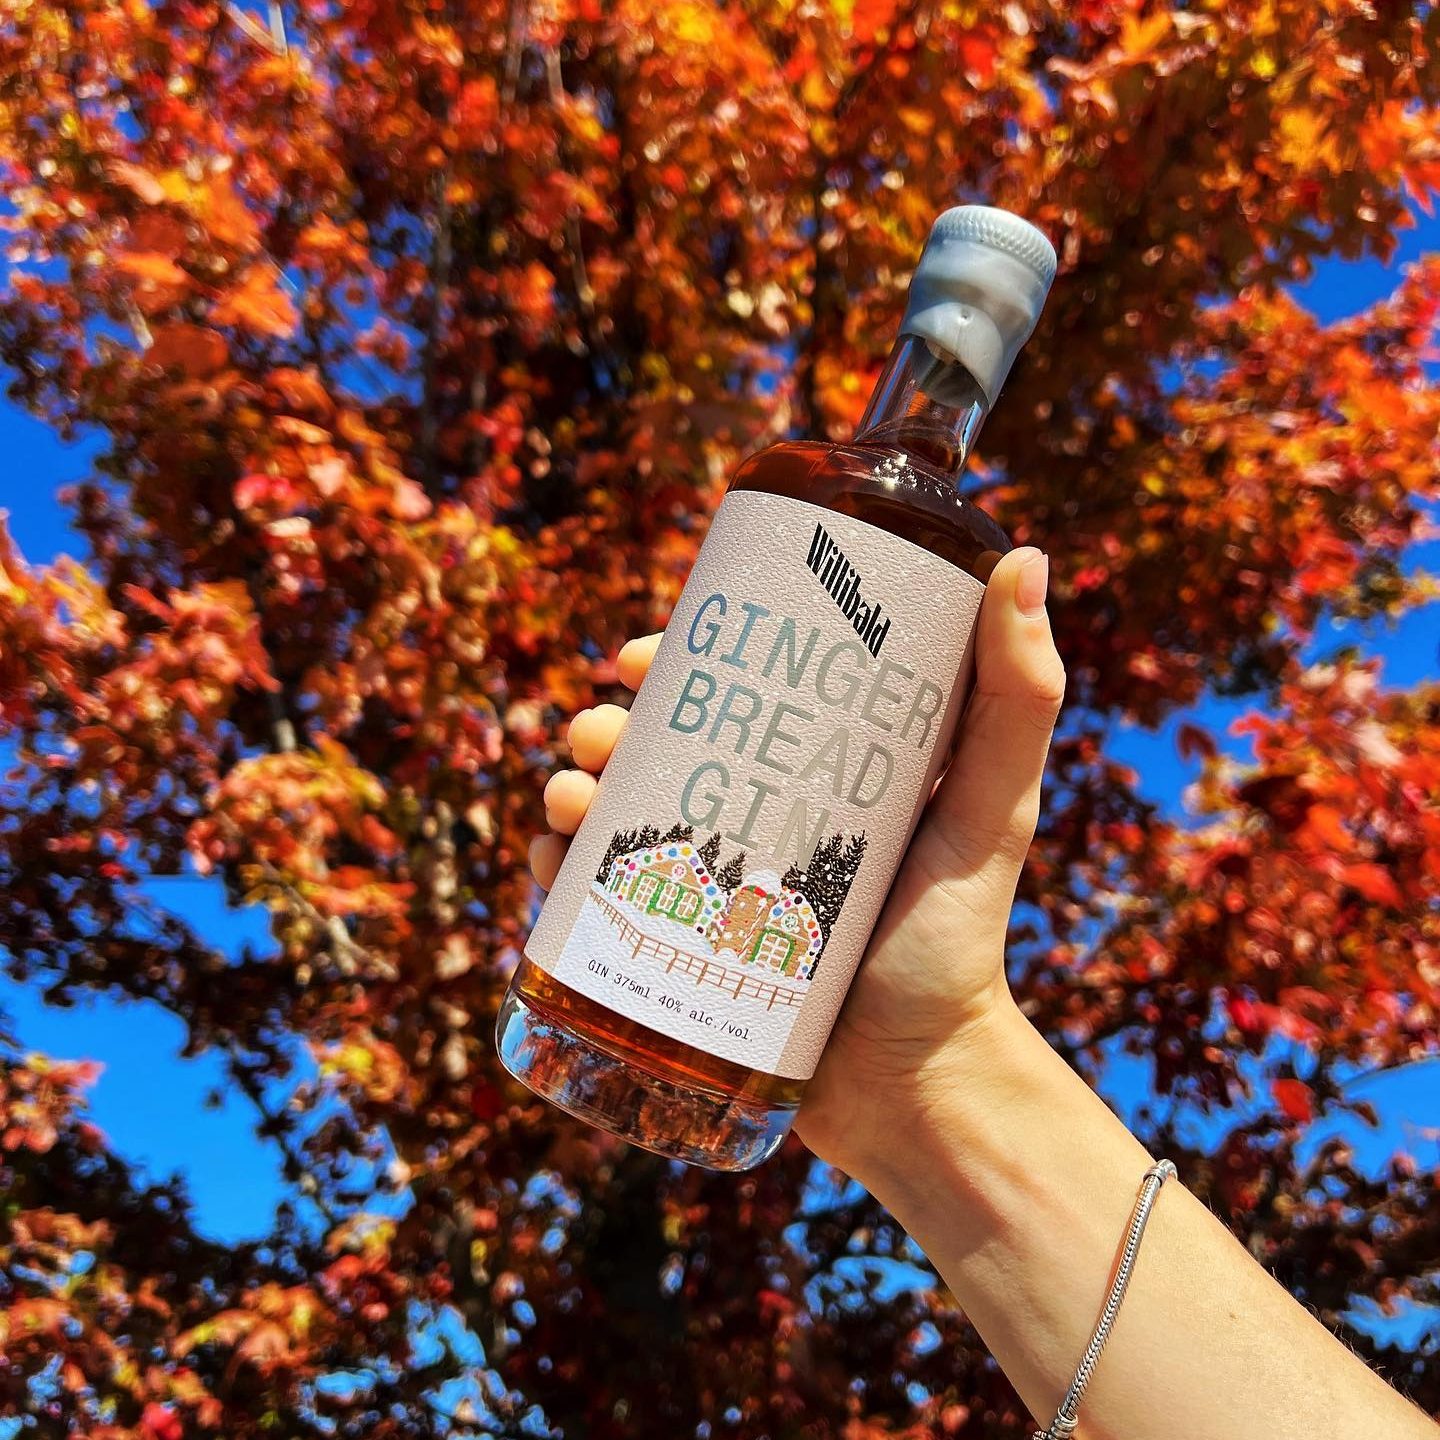 bottle of gingerbread gin from willibald being held up to a tree with orange leaves